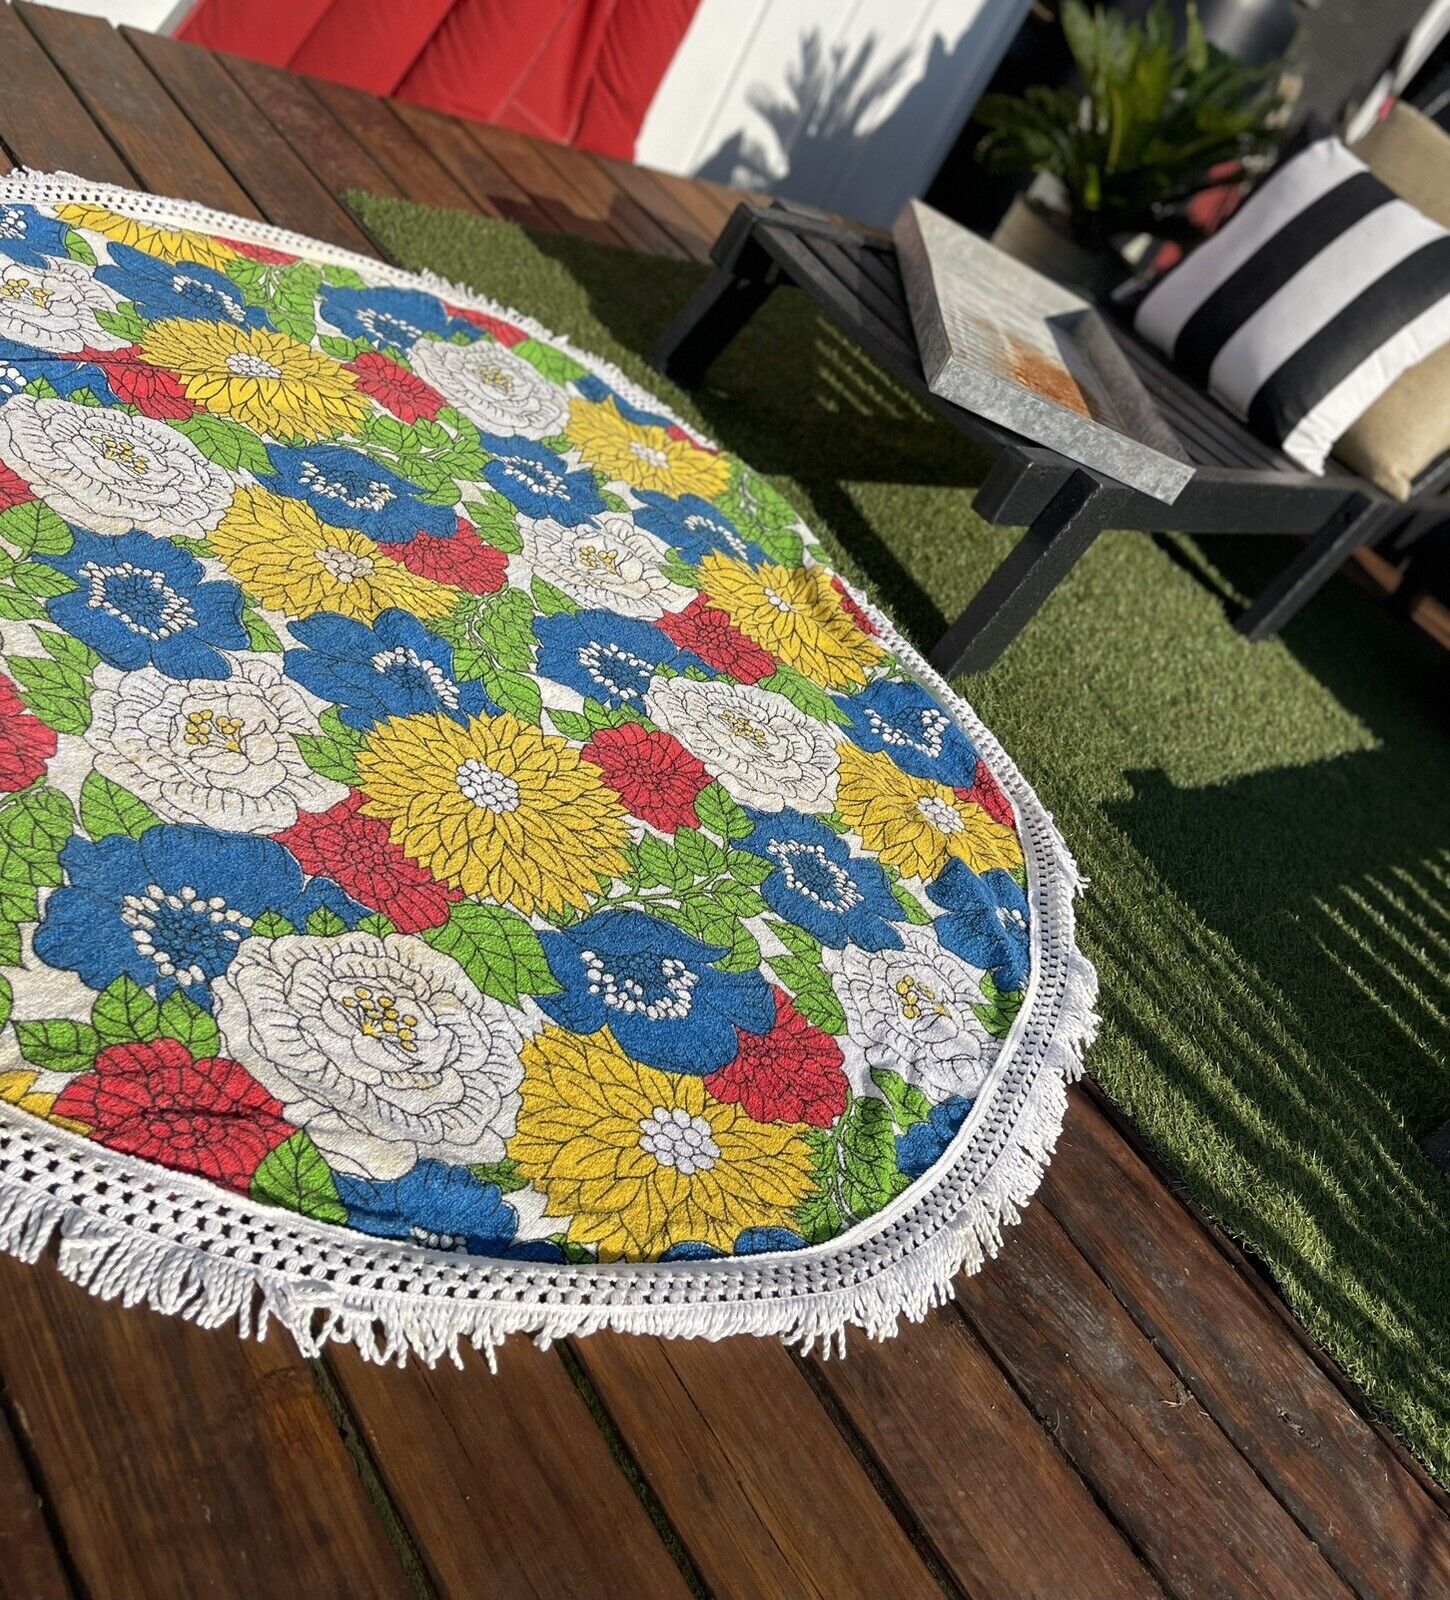 Vtg 60s/70s Terry Cloth Floral Print Round Tablecloth / Beach Towel With Fringe